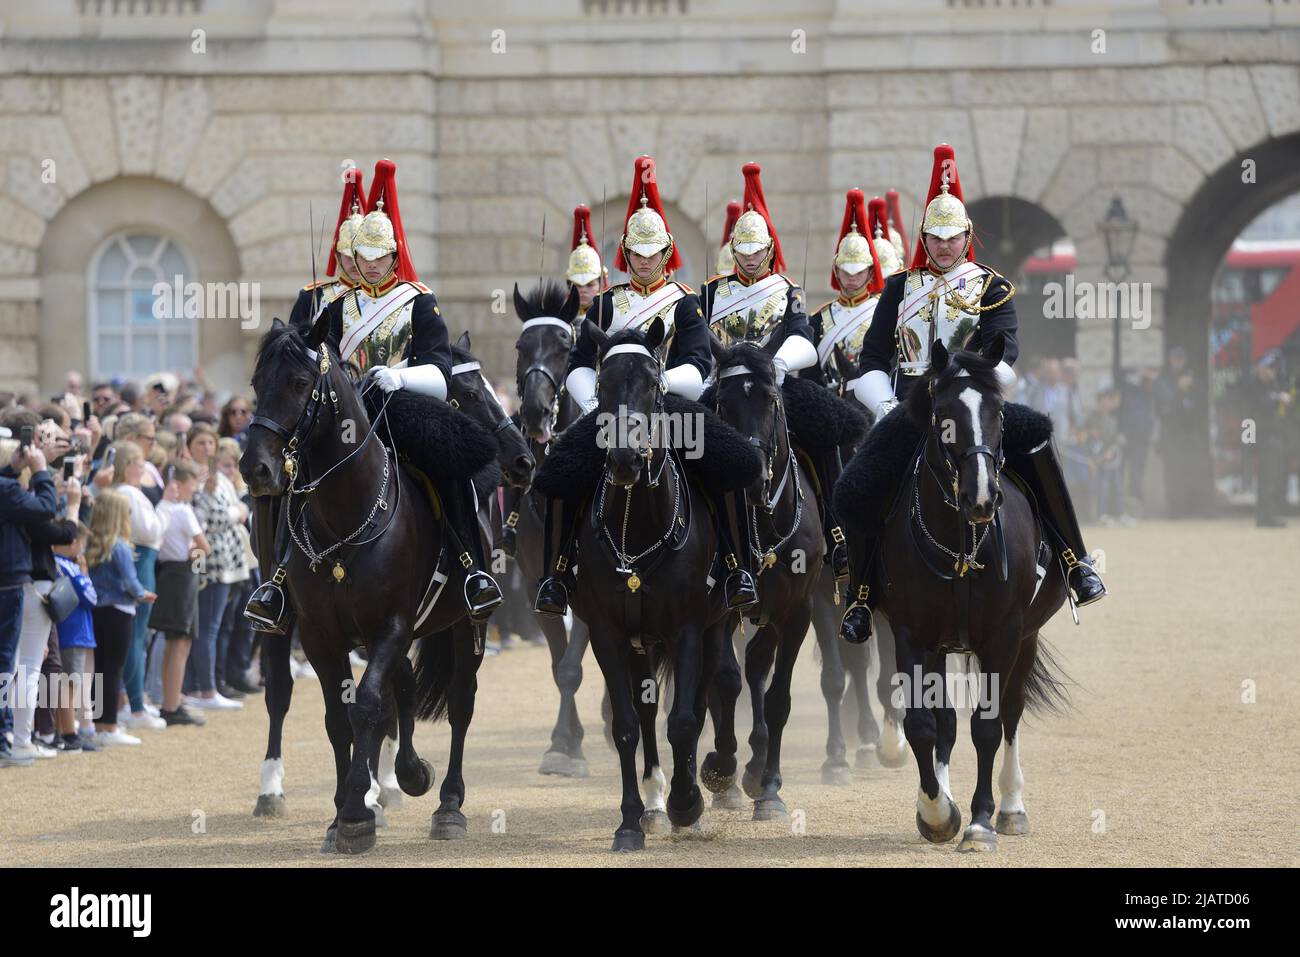 London, England, UK. Daily Changing of the Guard in Horse Guards Parade - members of the Blues and Royals Stock Photo